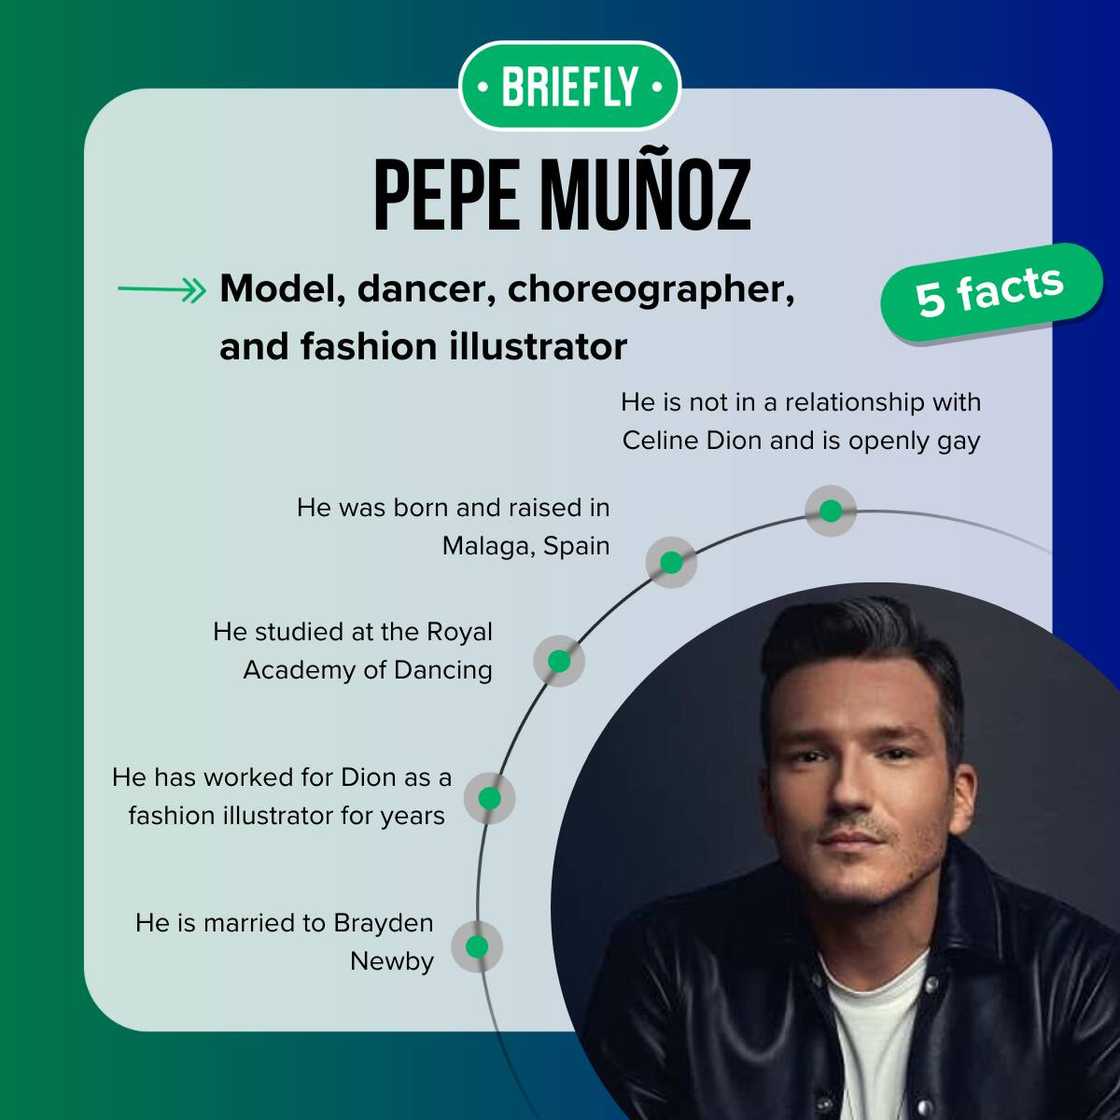 Top-5 facts about Pepe Muñoz